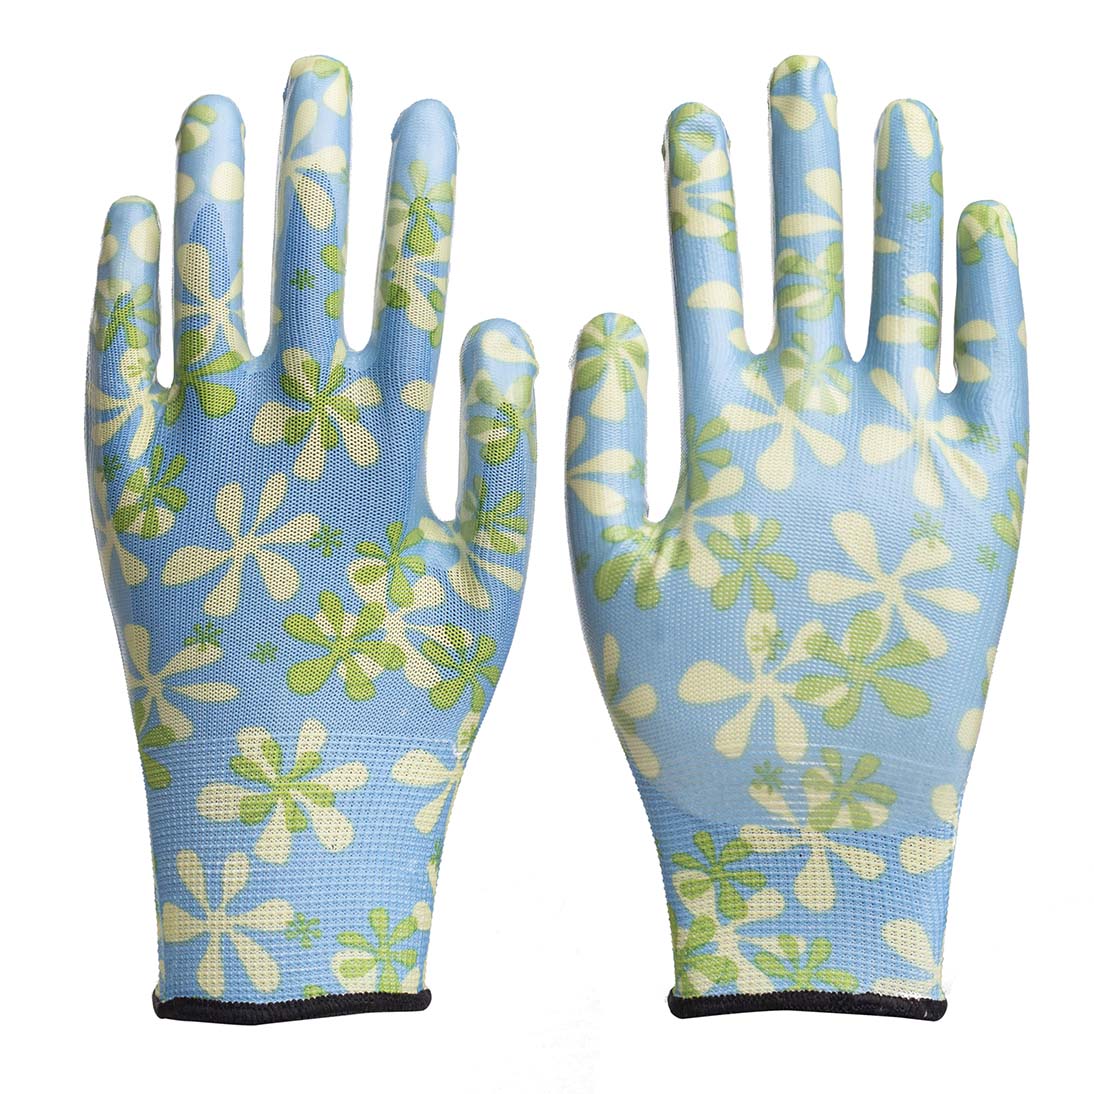 13G printed polyester garden glove smooth nitrile palm coated 